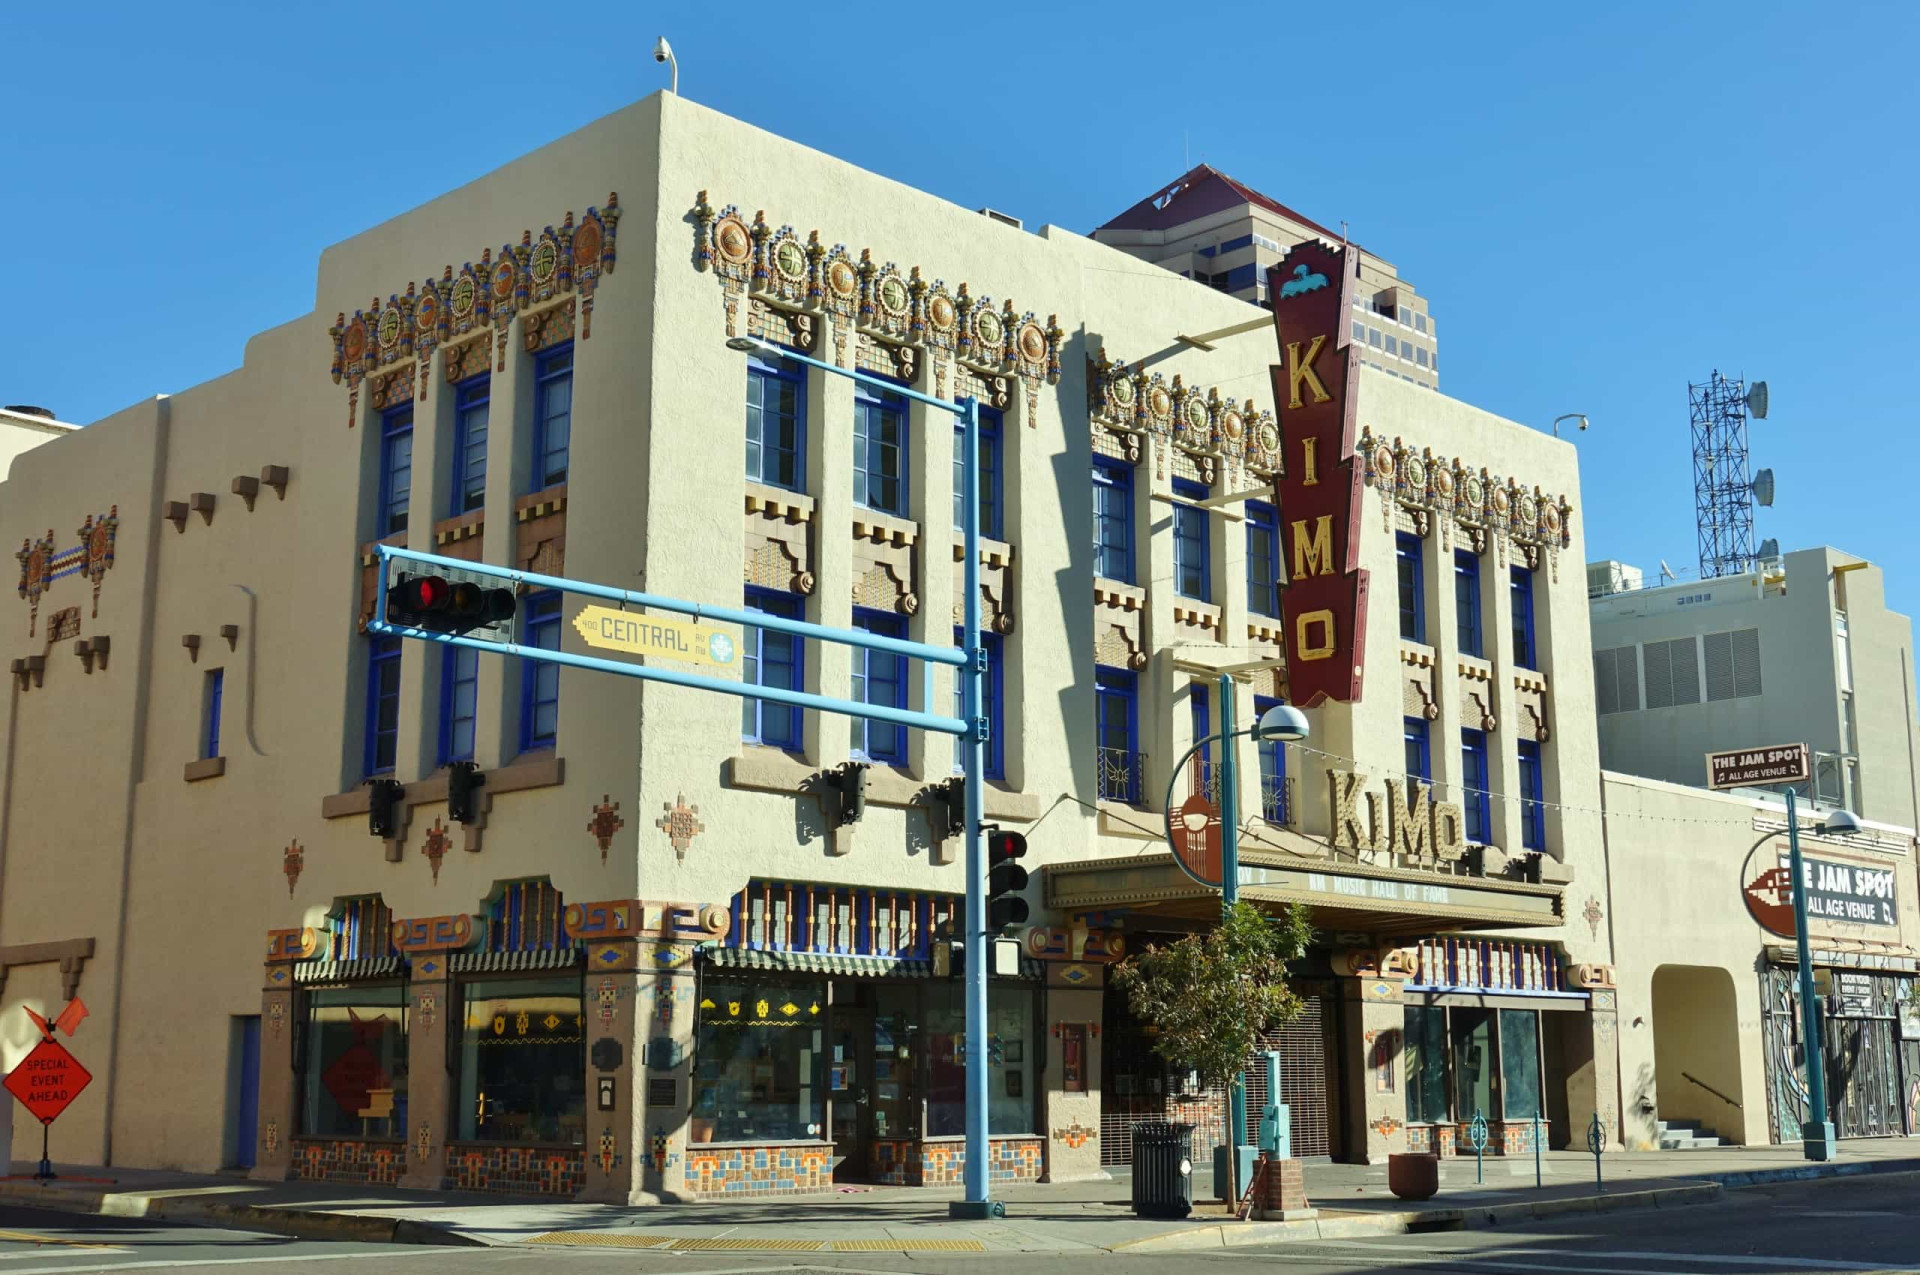 <p>The Kimo Theater in Albuquerque was built in 1927 and it's a famous landmark, though it's also haunted by the ghost of a young boy named Bobby. The boy is said to have died in the Kimo in 1951, when a boiler exploded in the basement.</p>